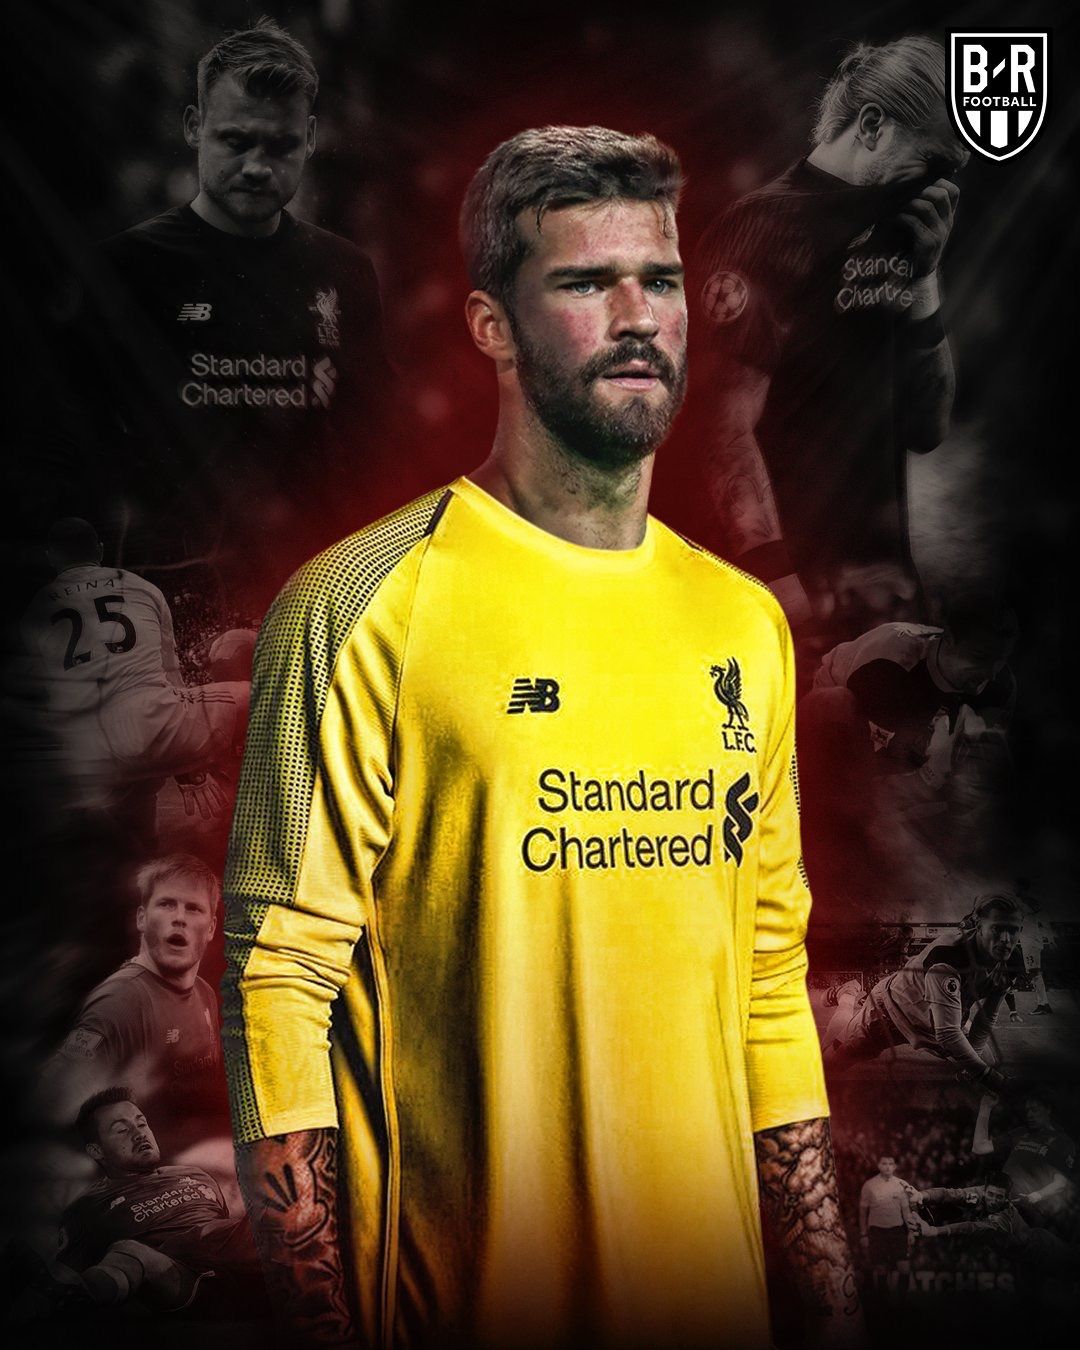 Liverpool And Brazil S Allison Becker Credit To Brfootball On